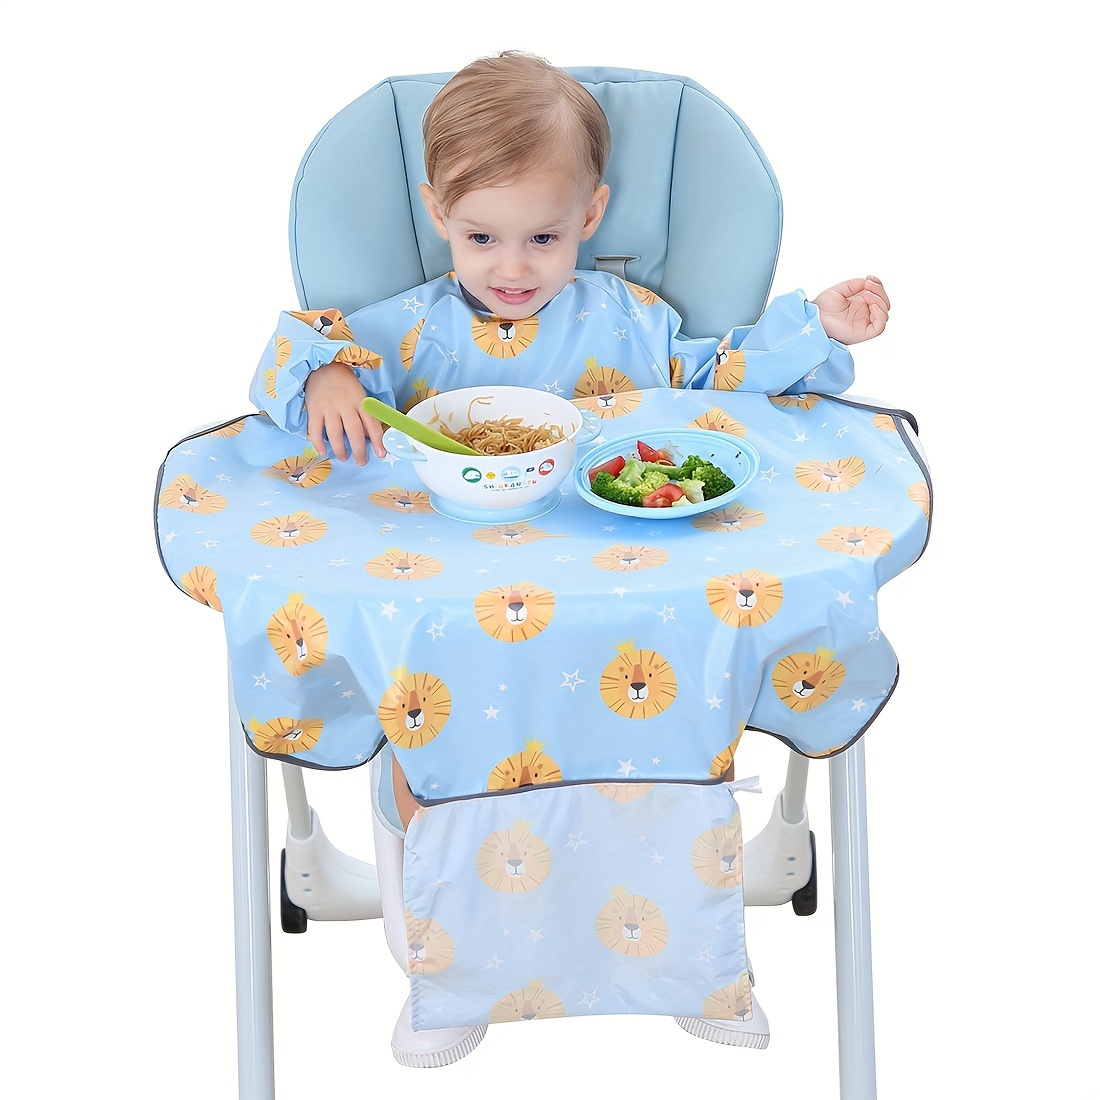 Baby Products Online - Food Catcher Jumpsuit Apron with sleeves attaches to  a baby chair tray - Tidy Tot bib kit and tray. Baby detox apron is ideal  for a leading baby